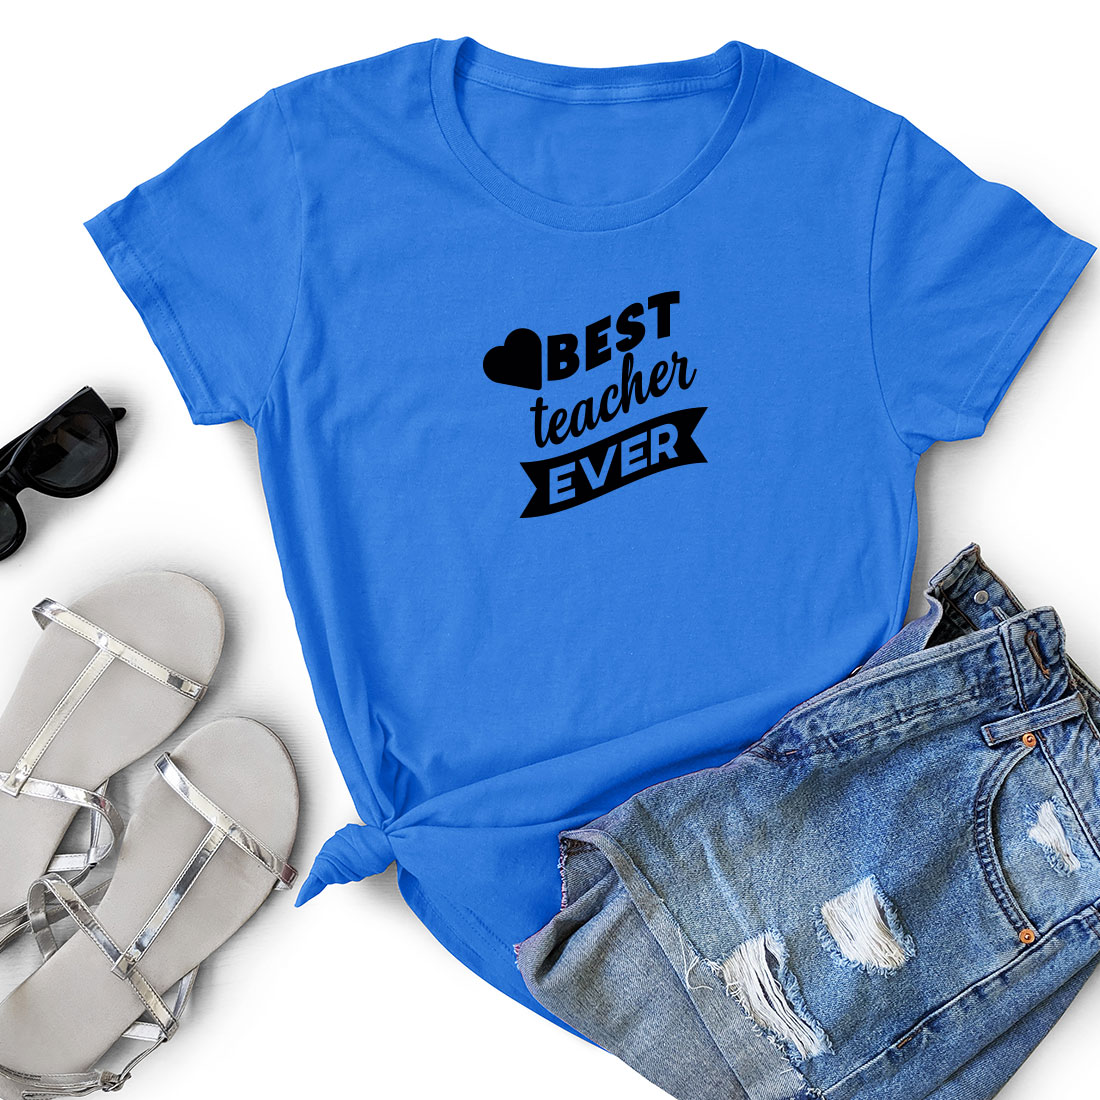 Inspirational Quotes Shirts for Women Find The Beauty in Everyday T-Shirt  Casual Graphic Tee Short Sleeves Top Blue S at Amazon Women's Clothing store